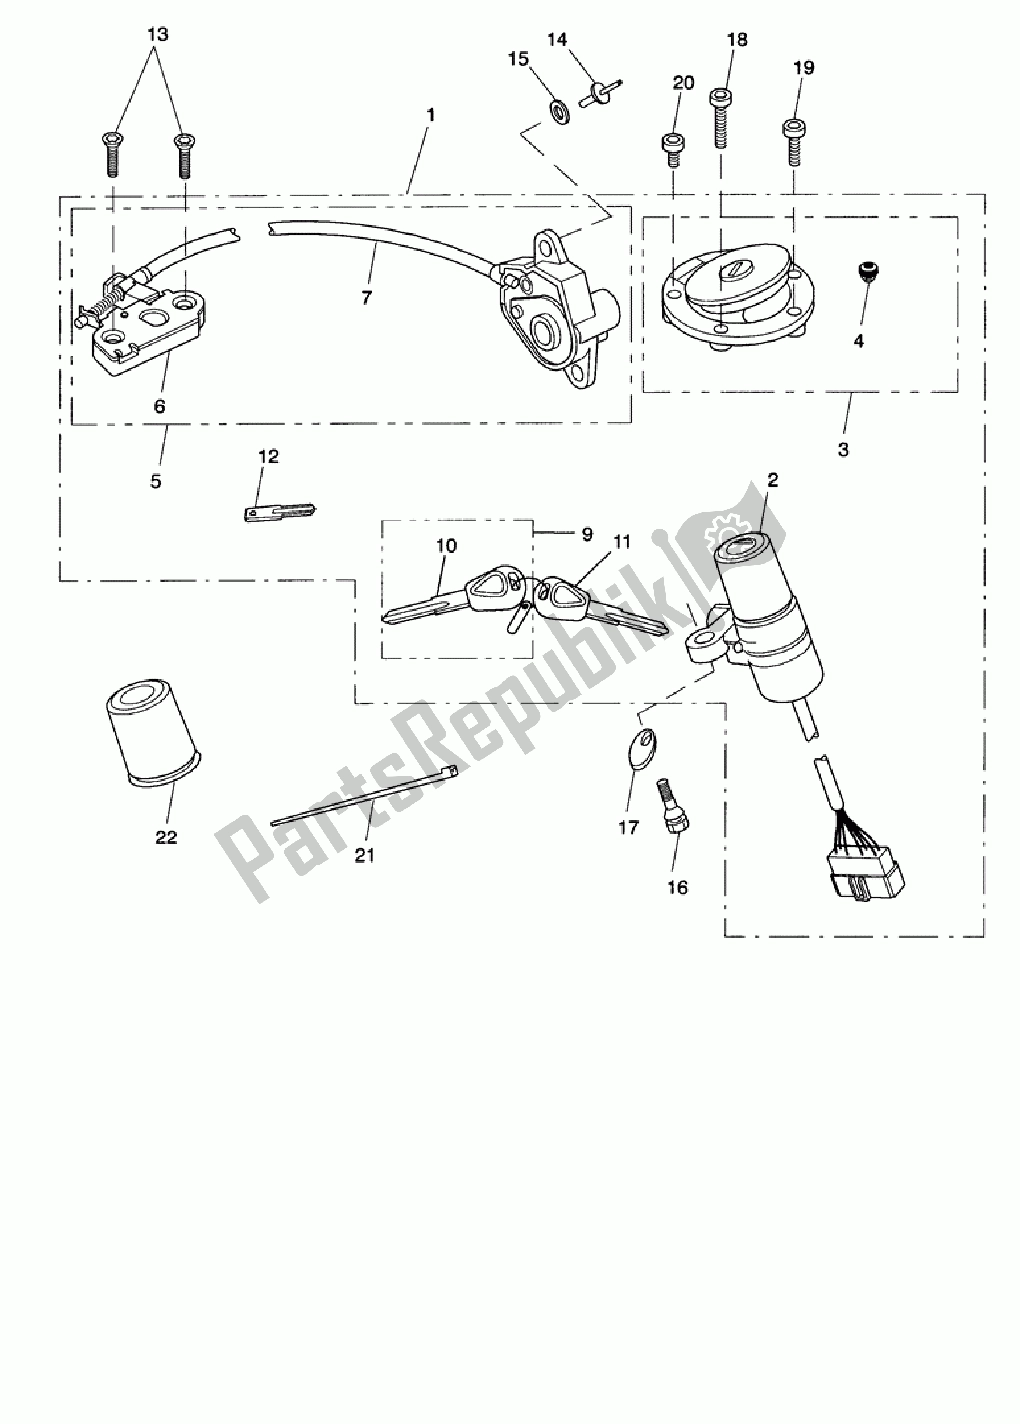 All parts for the Ignition Switch & Lock Set - 333179 > of the Triumph Speed Triple 1050 2008 - 2012